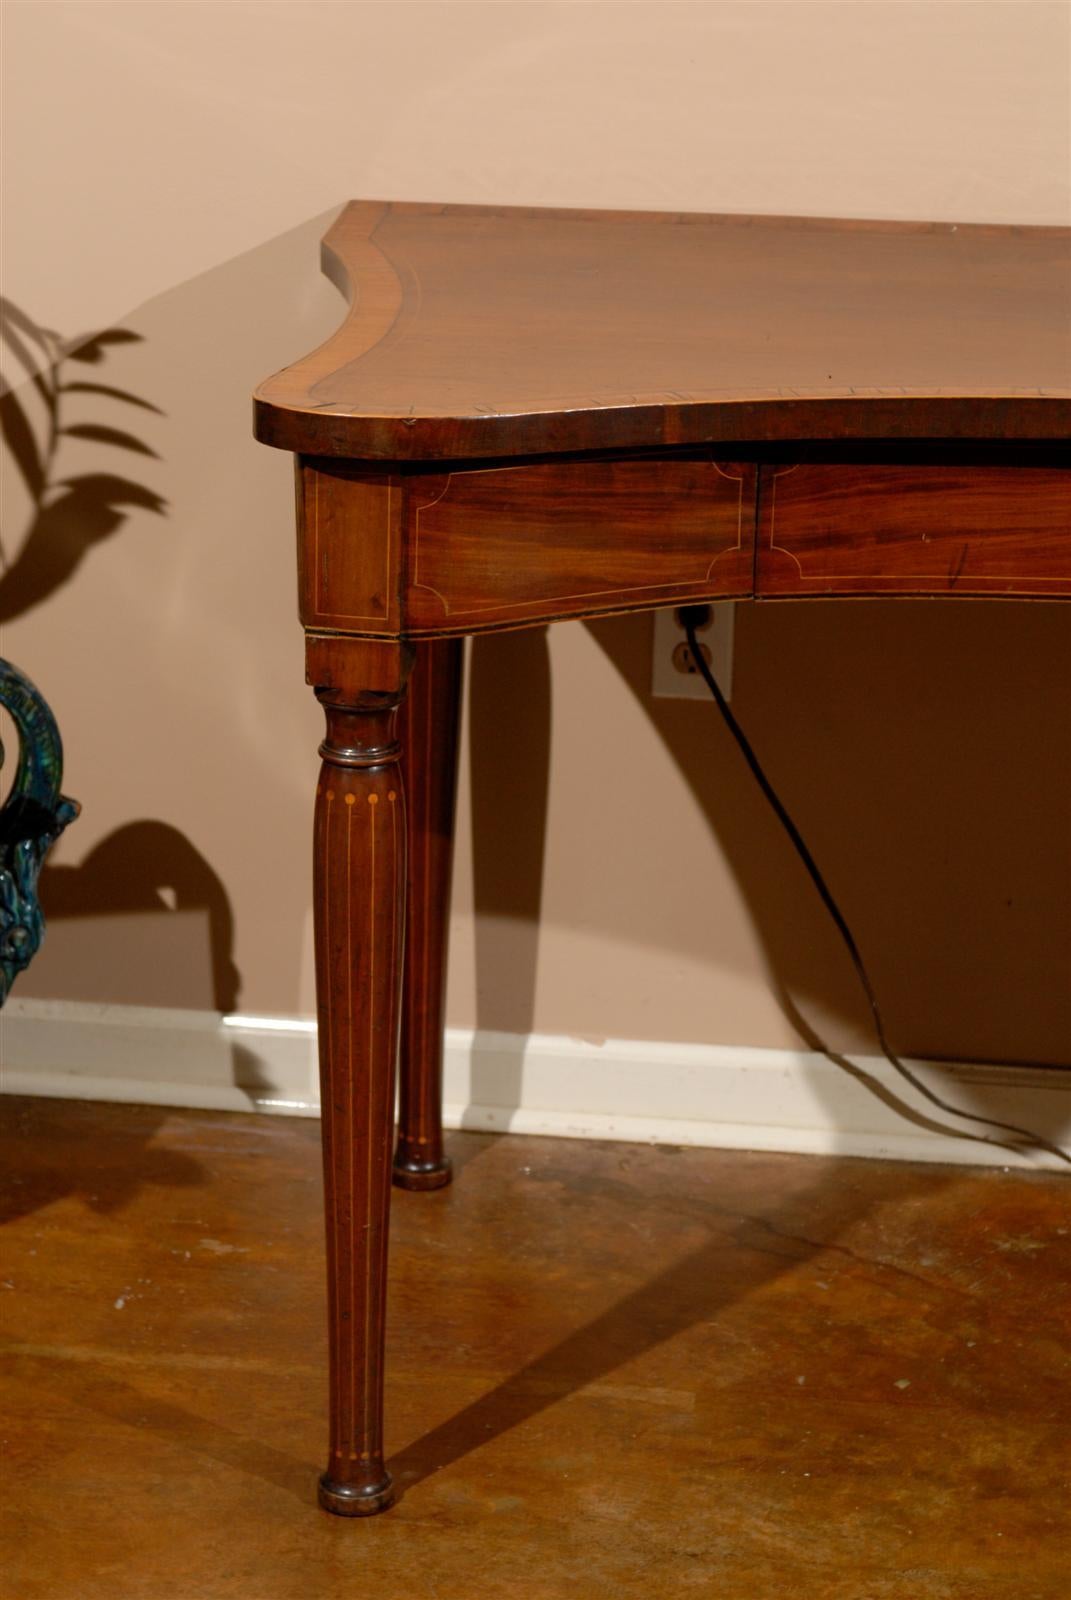 Early 19th Century George III Inlaid Mahogany Kidney-Shaped Console Table